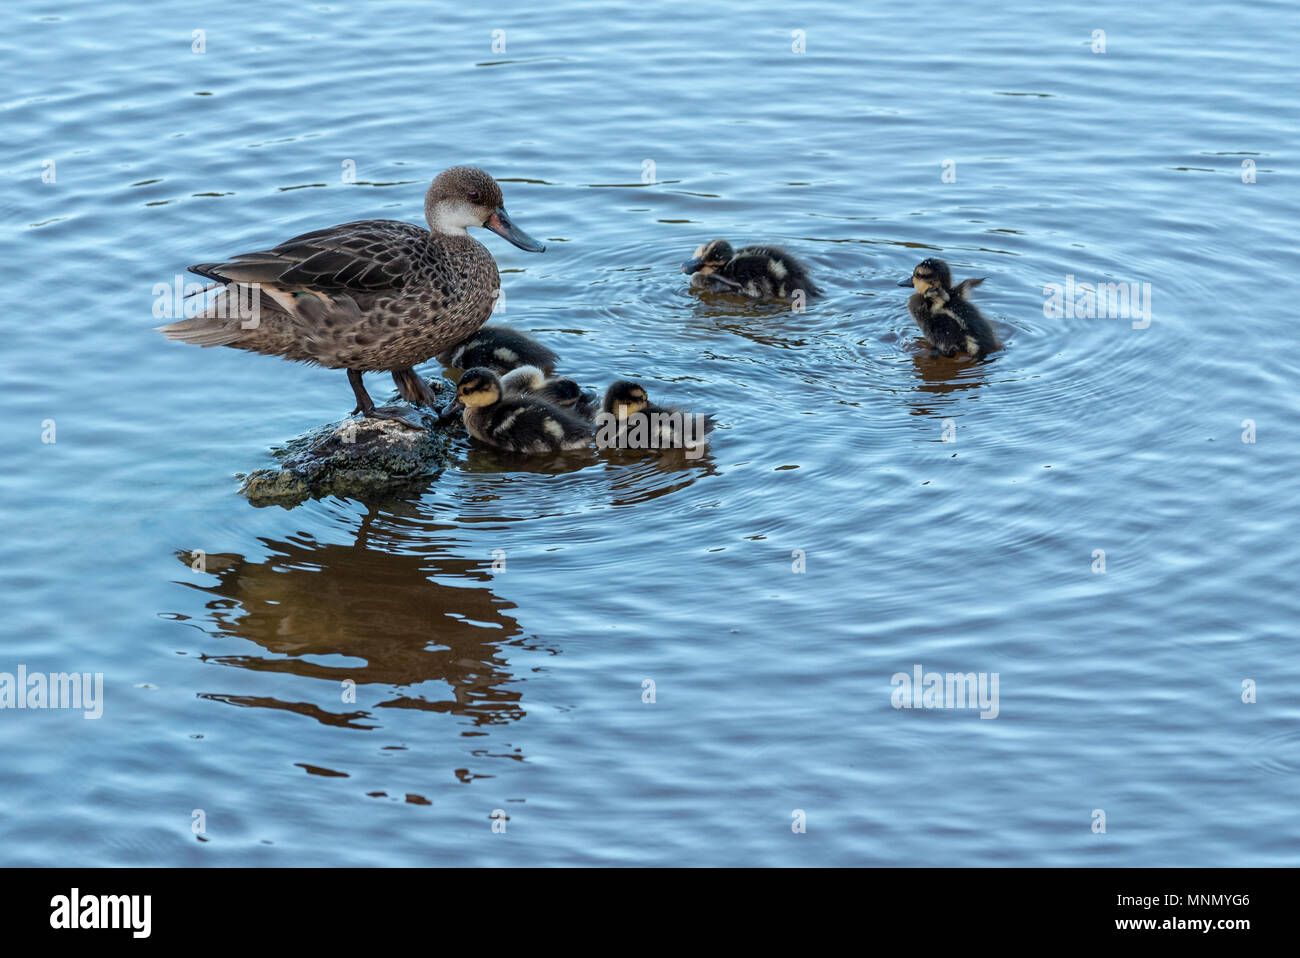 White-cheeked pintail duck with ducklings in a salt water lagoon on Isabela Island, Galapagos Islands, Ecuador. Stock Photo